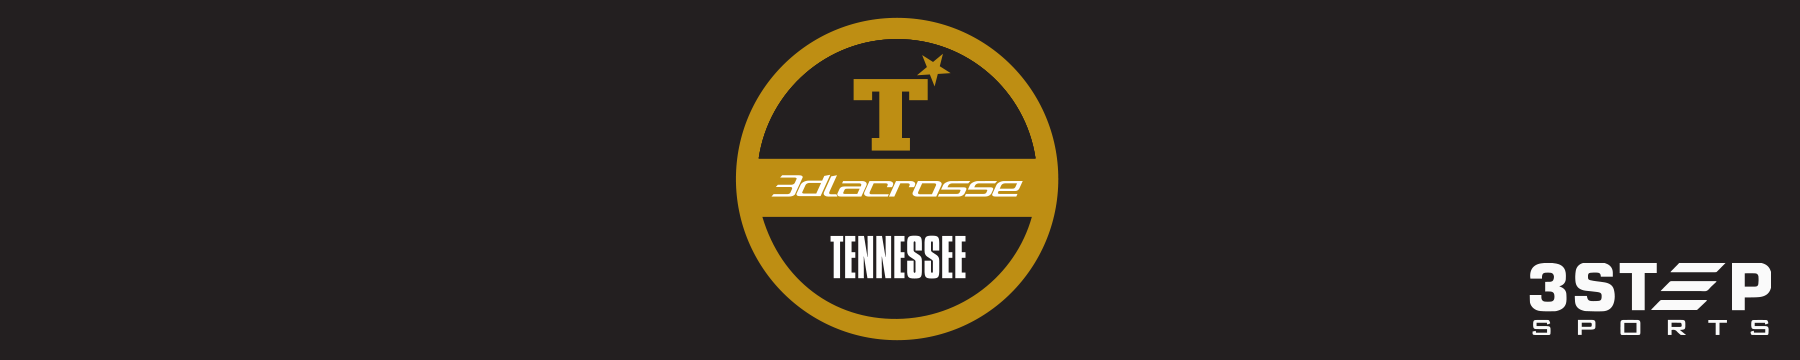 3d Tennessee